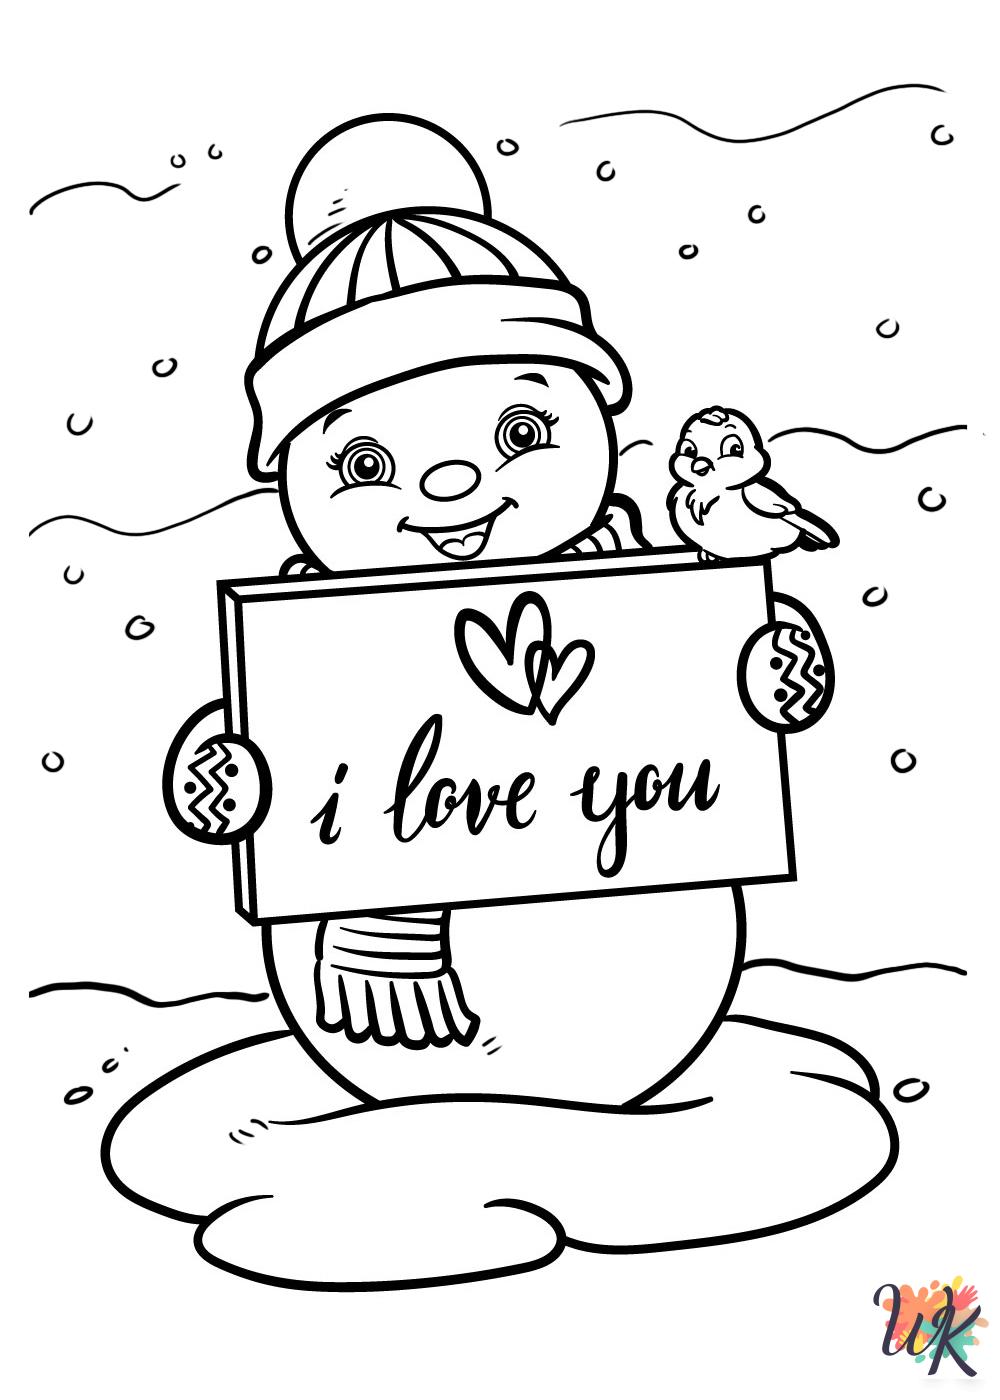 Snowman coloring pages printable free 2